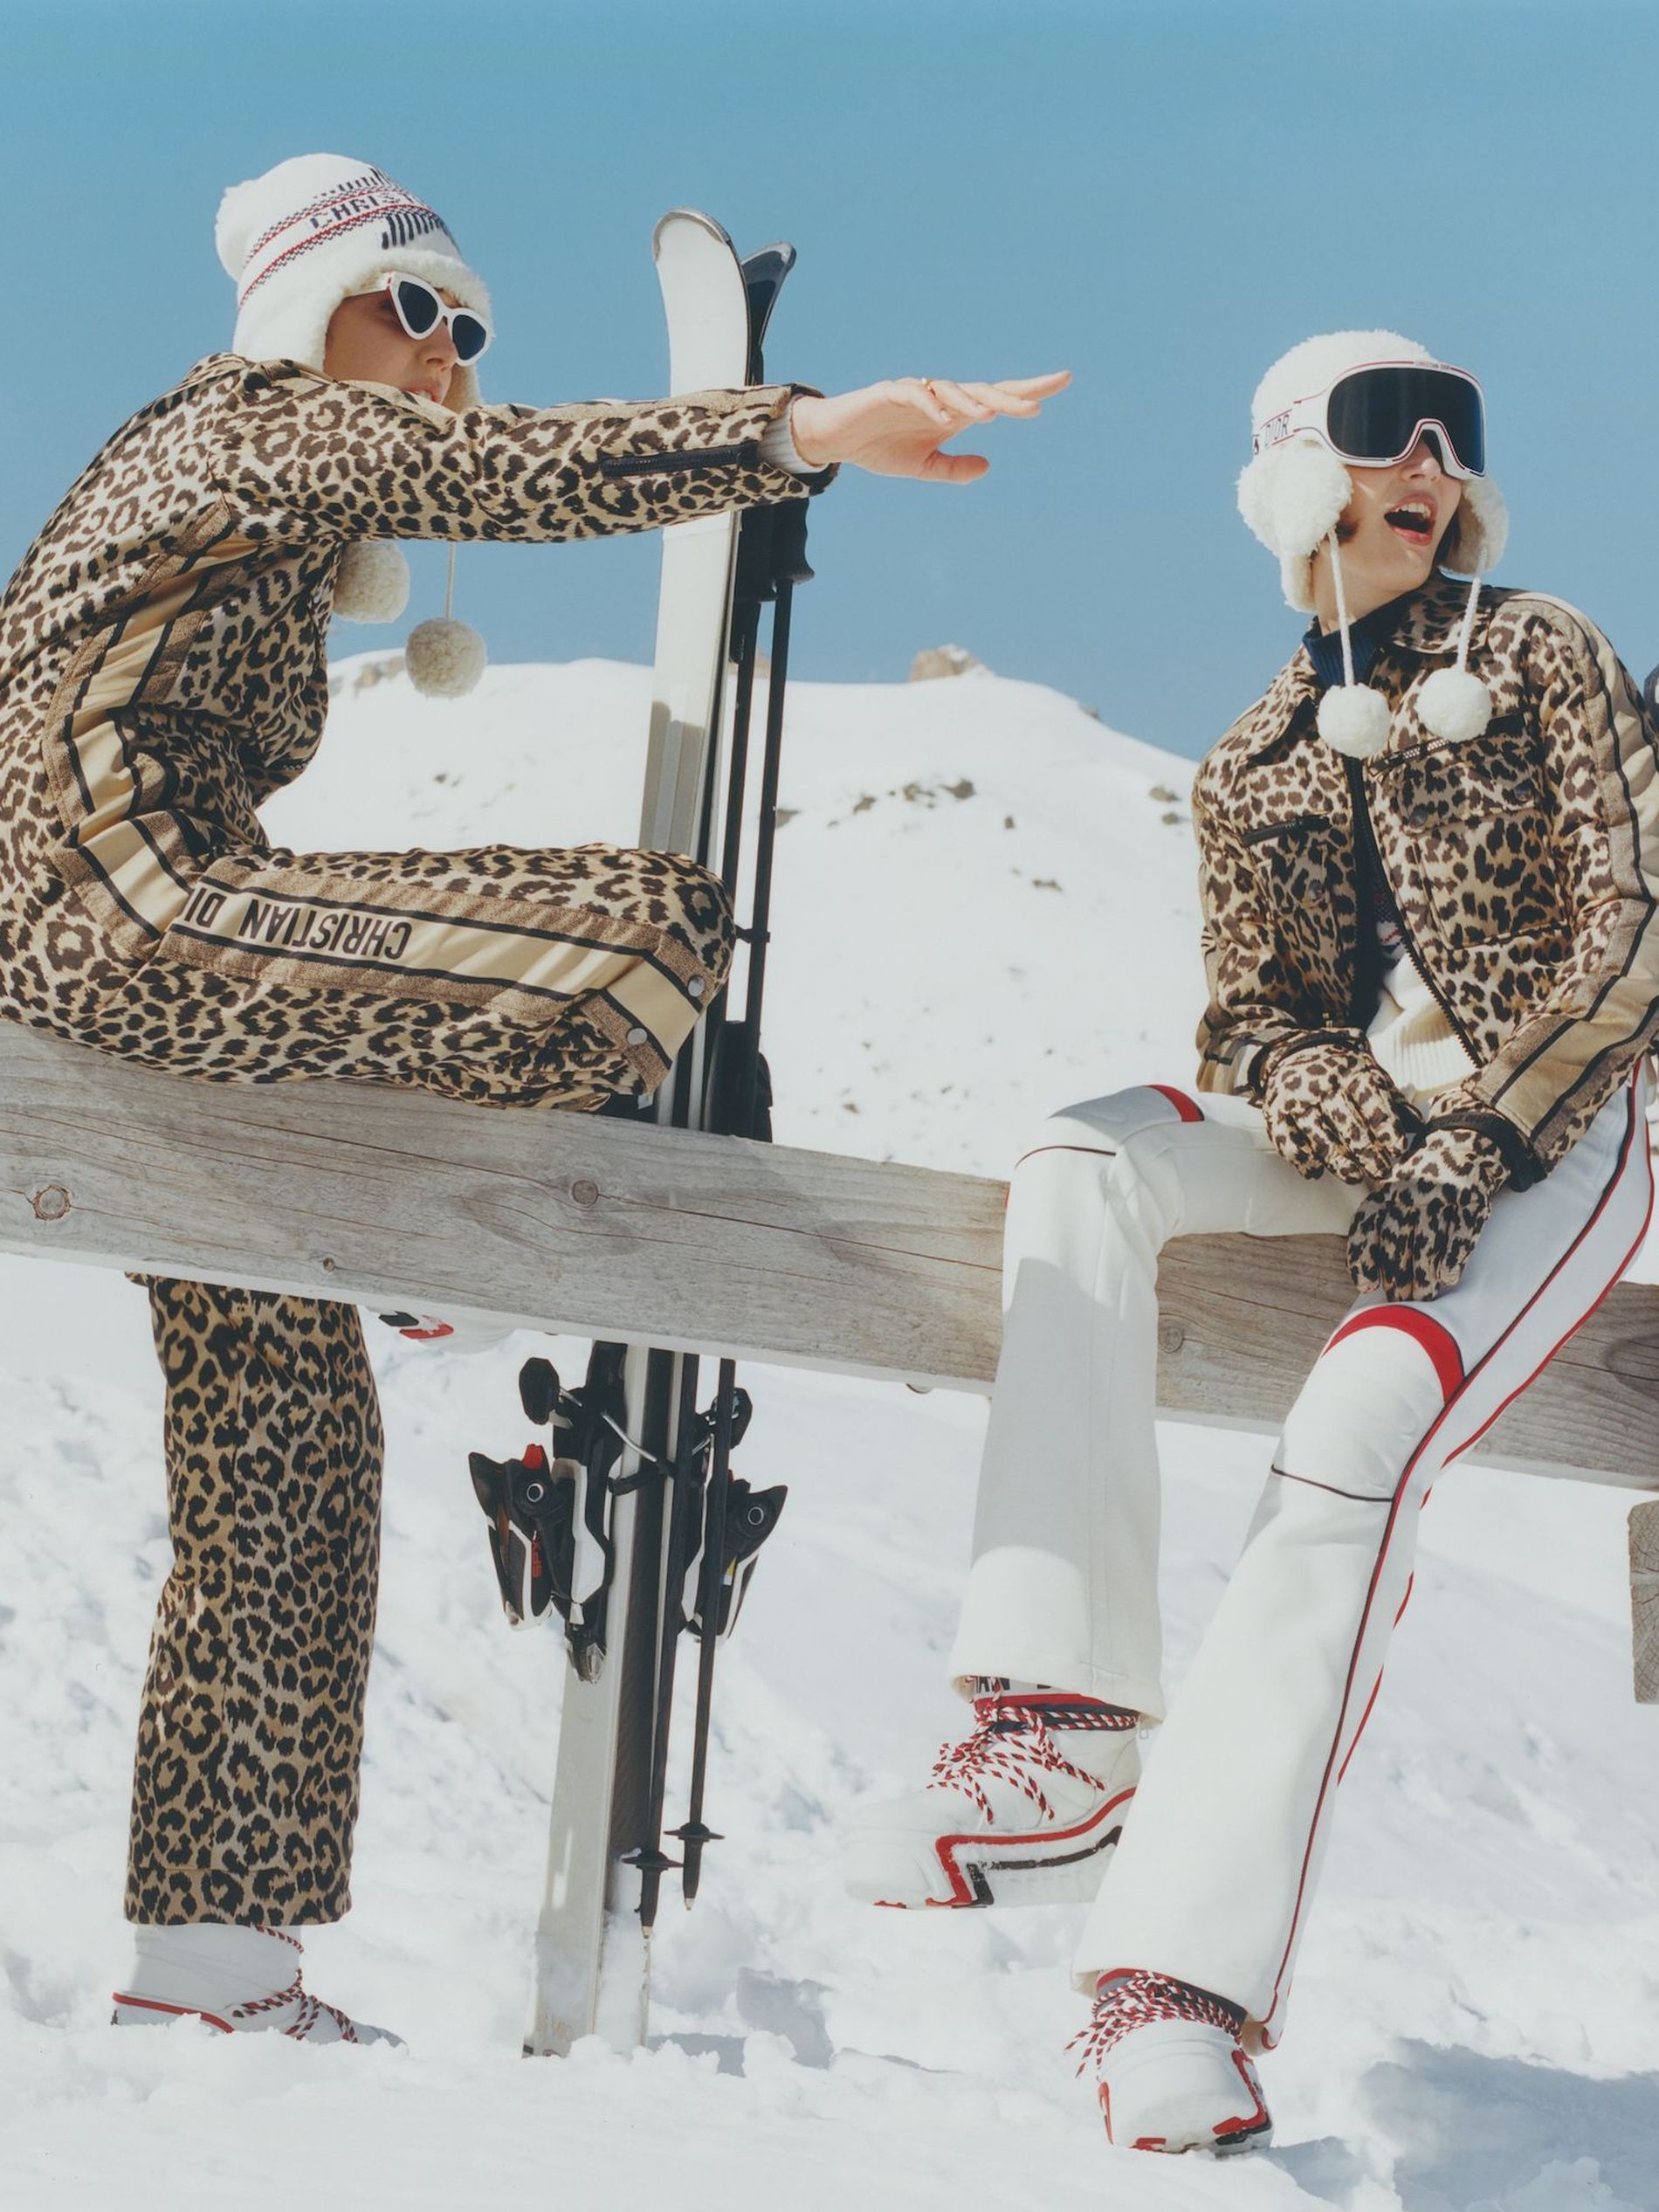 5 designer ski outfits we can't wait to hit the slopes in - Vogue  Scandinavia